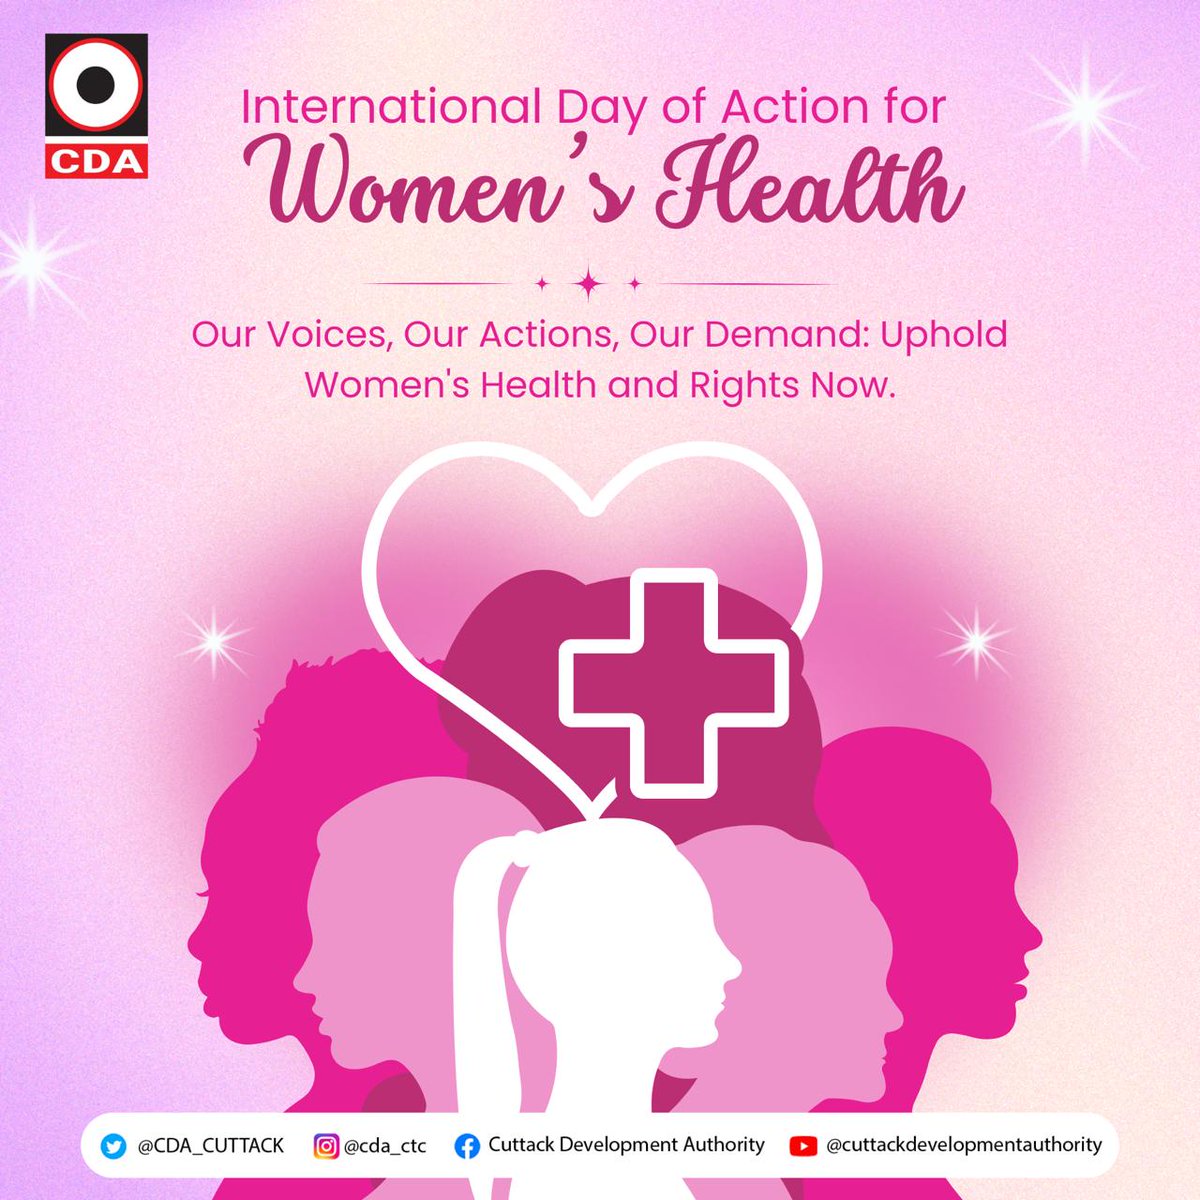 On this International Day of Action for Women's Health, let's prioritize and protect women's health together. 

#cuttackdevelopmentauthority #CDA #cuttack